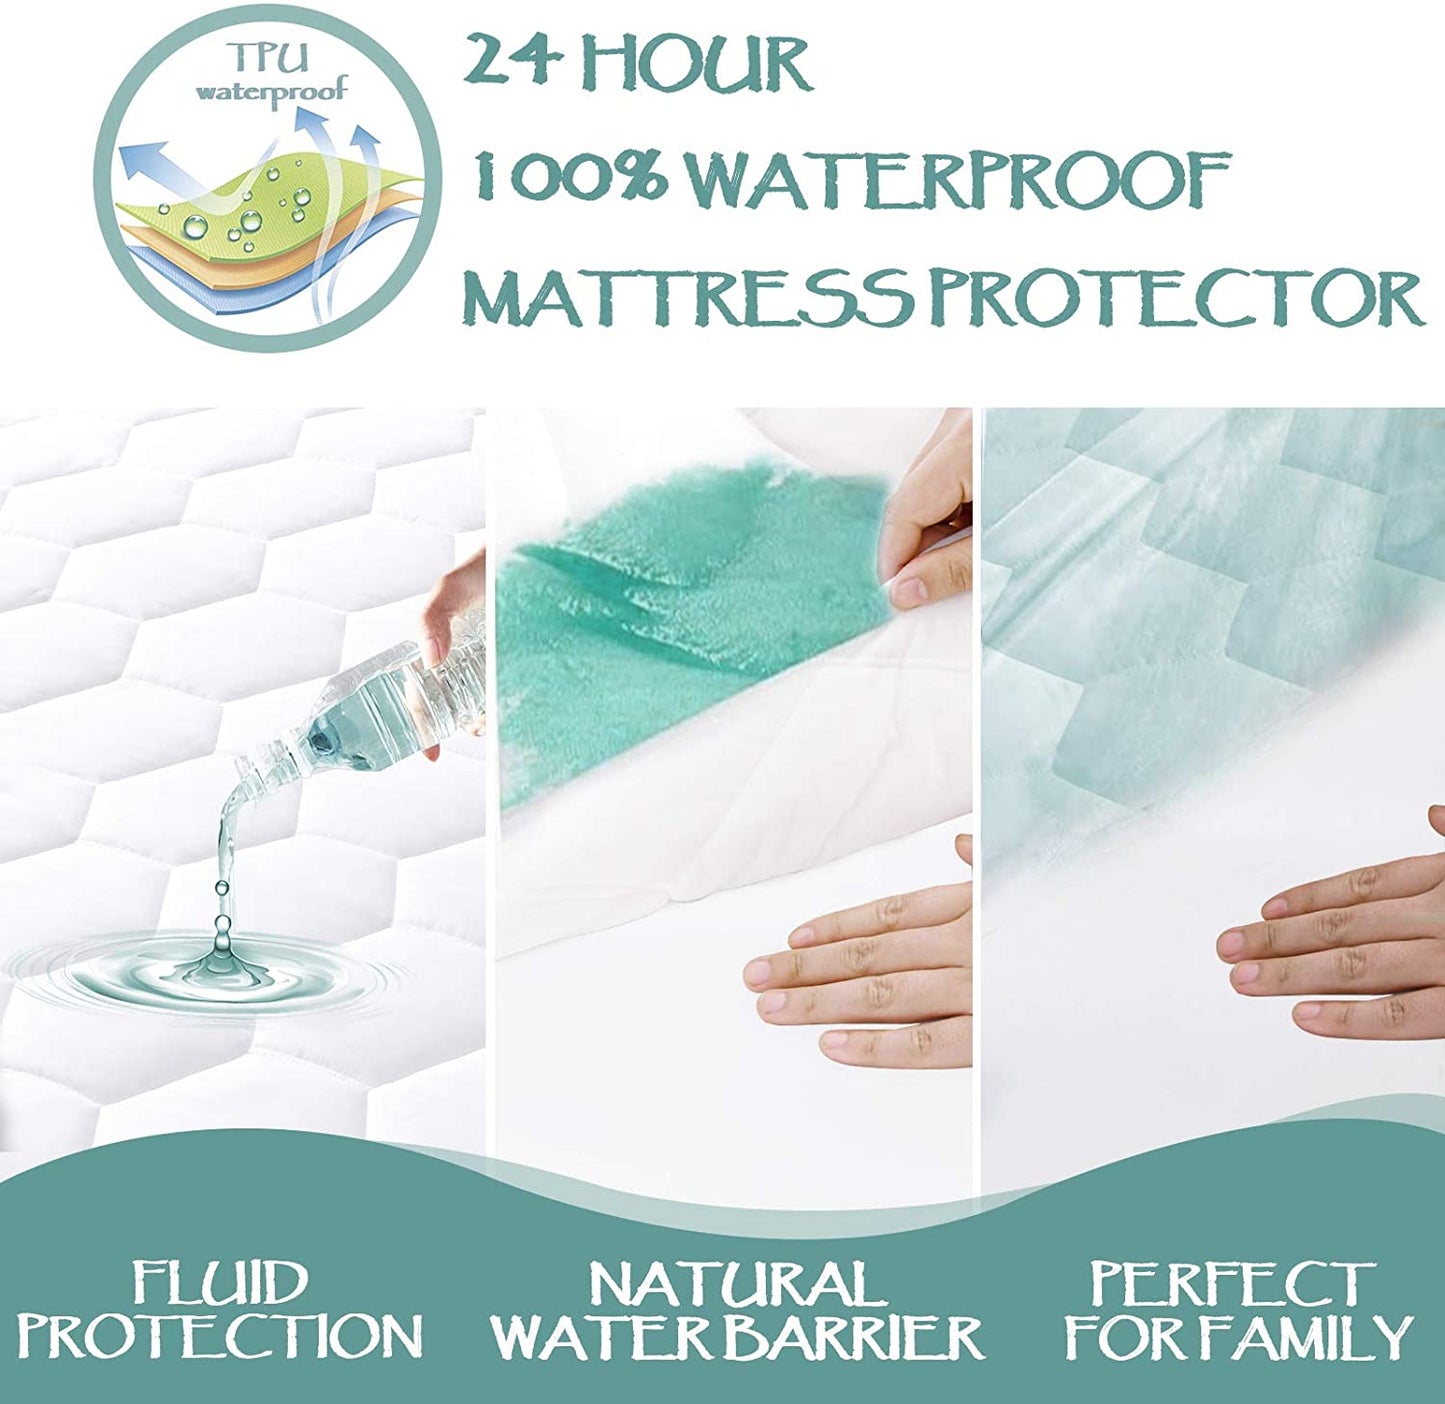 Twin XL Quilted Waterproof Mattress Pad Cover,Soft Mattress Pad Cover, Waterproof Mattress Protector Stretches up to 16” Deep Pocket-Hollow Alternative Filling-Cooling Mattress Topper